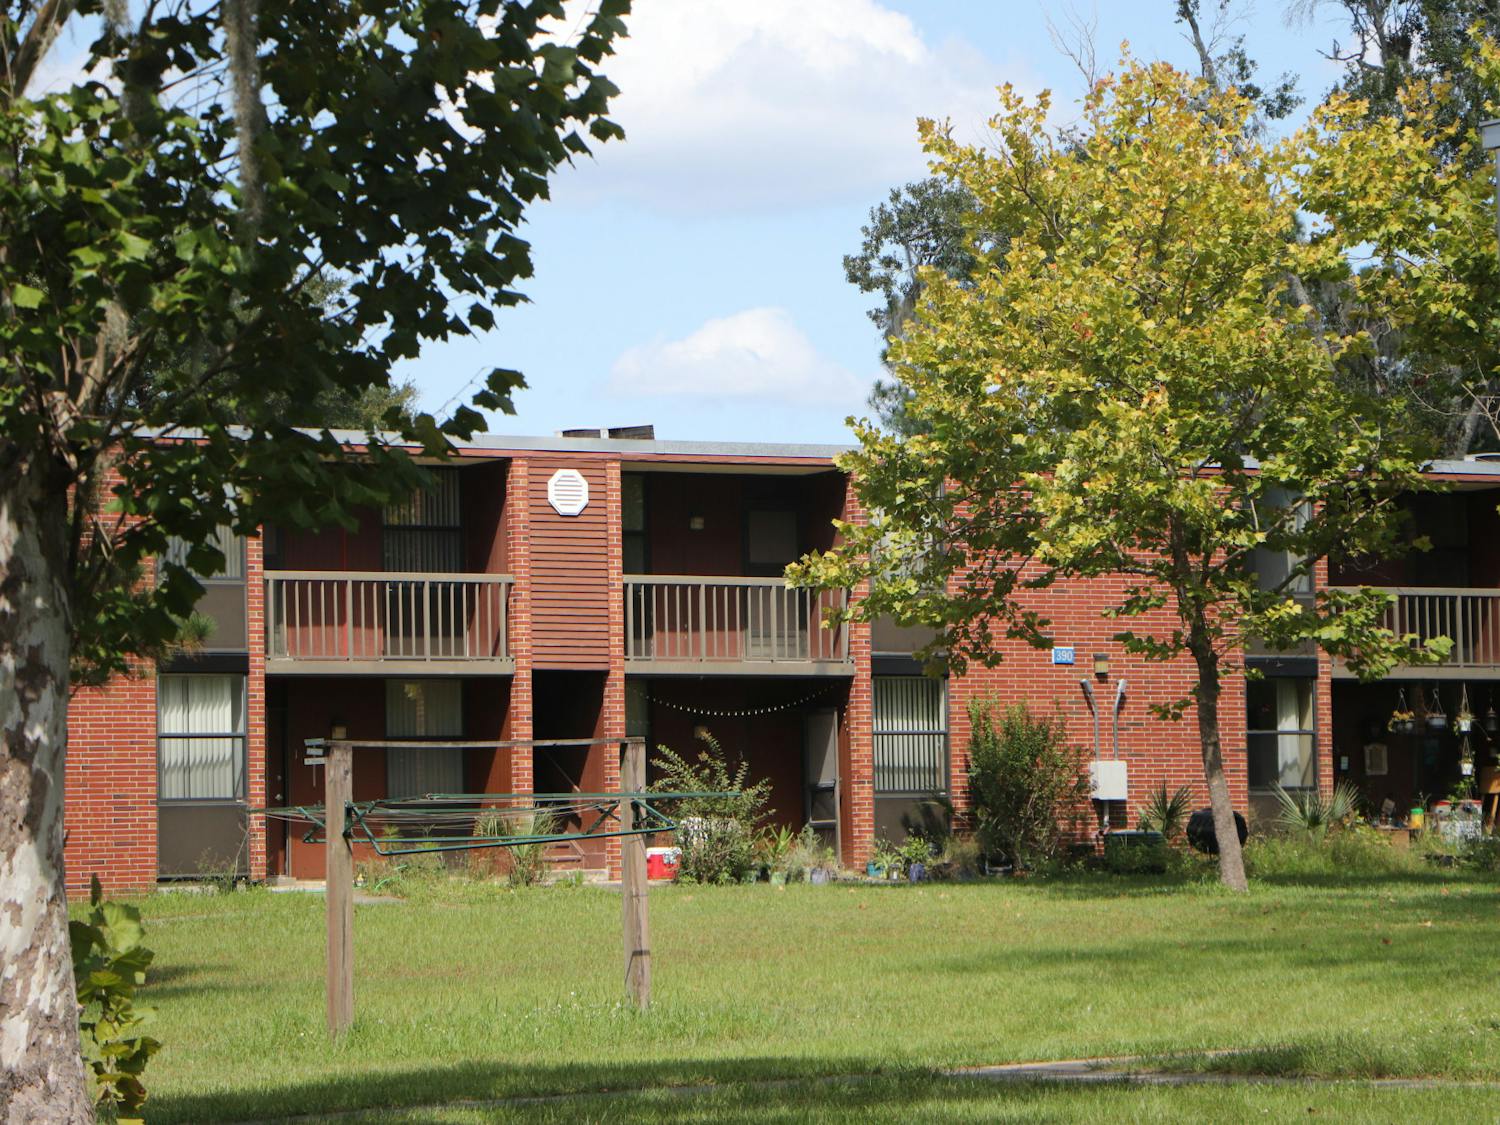 Maguire Village is a student housing facility located off of Radio Road. 